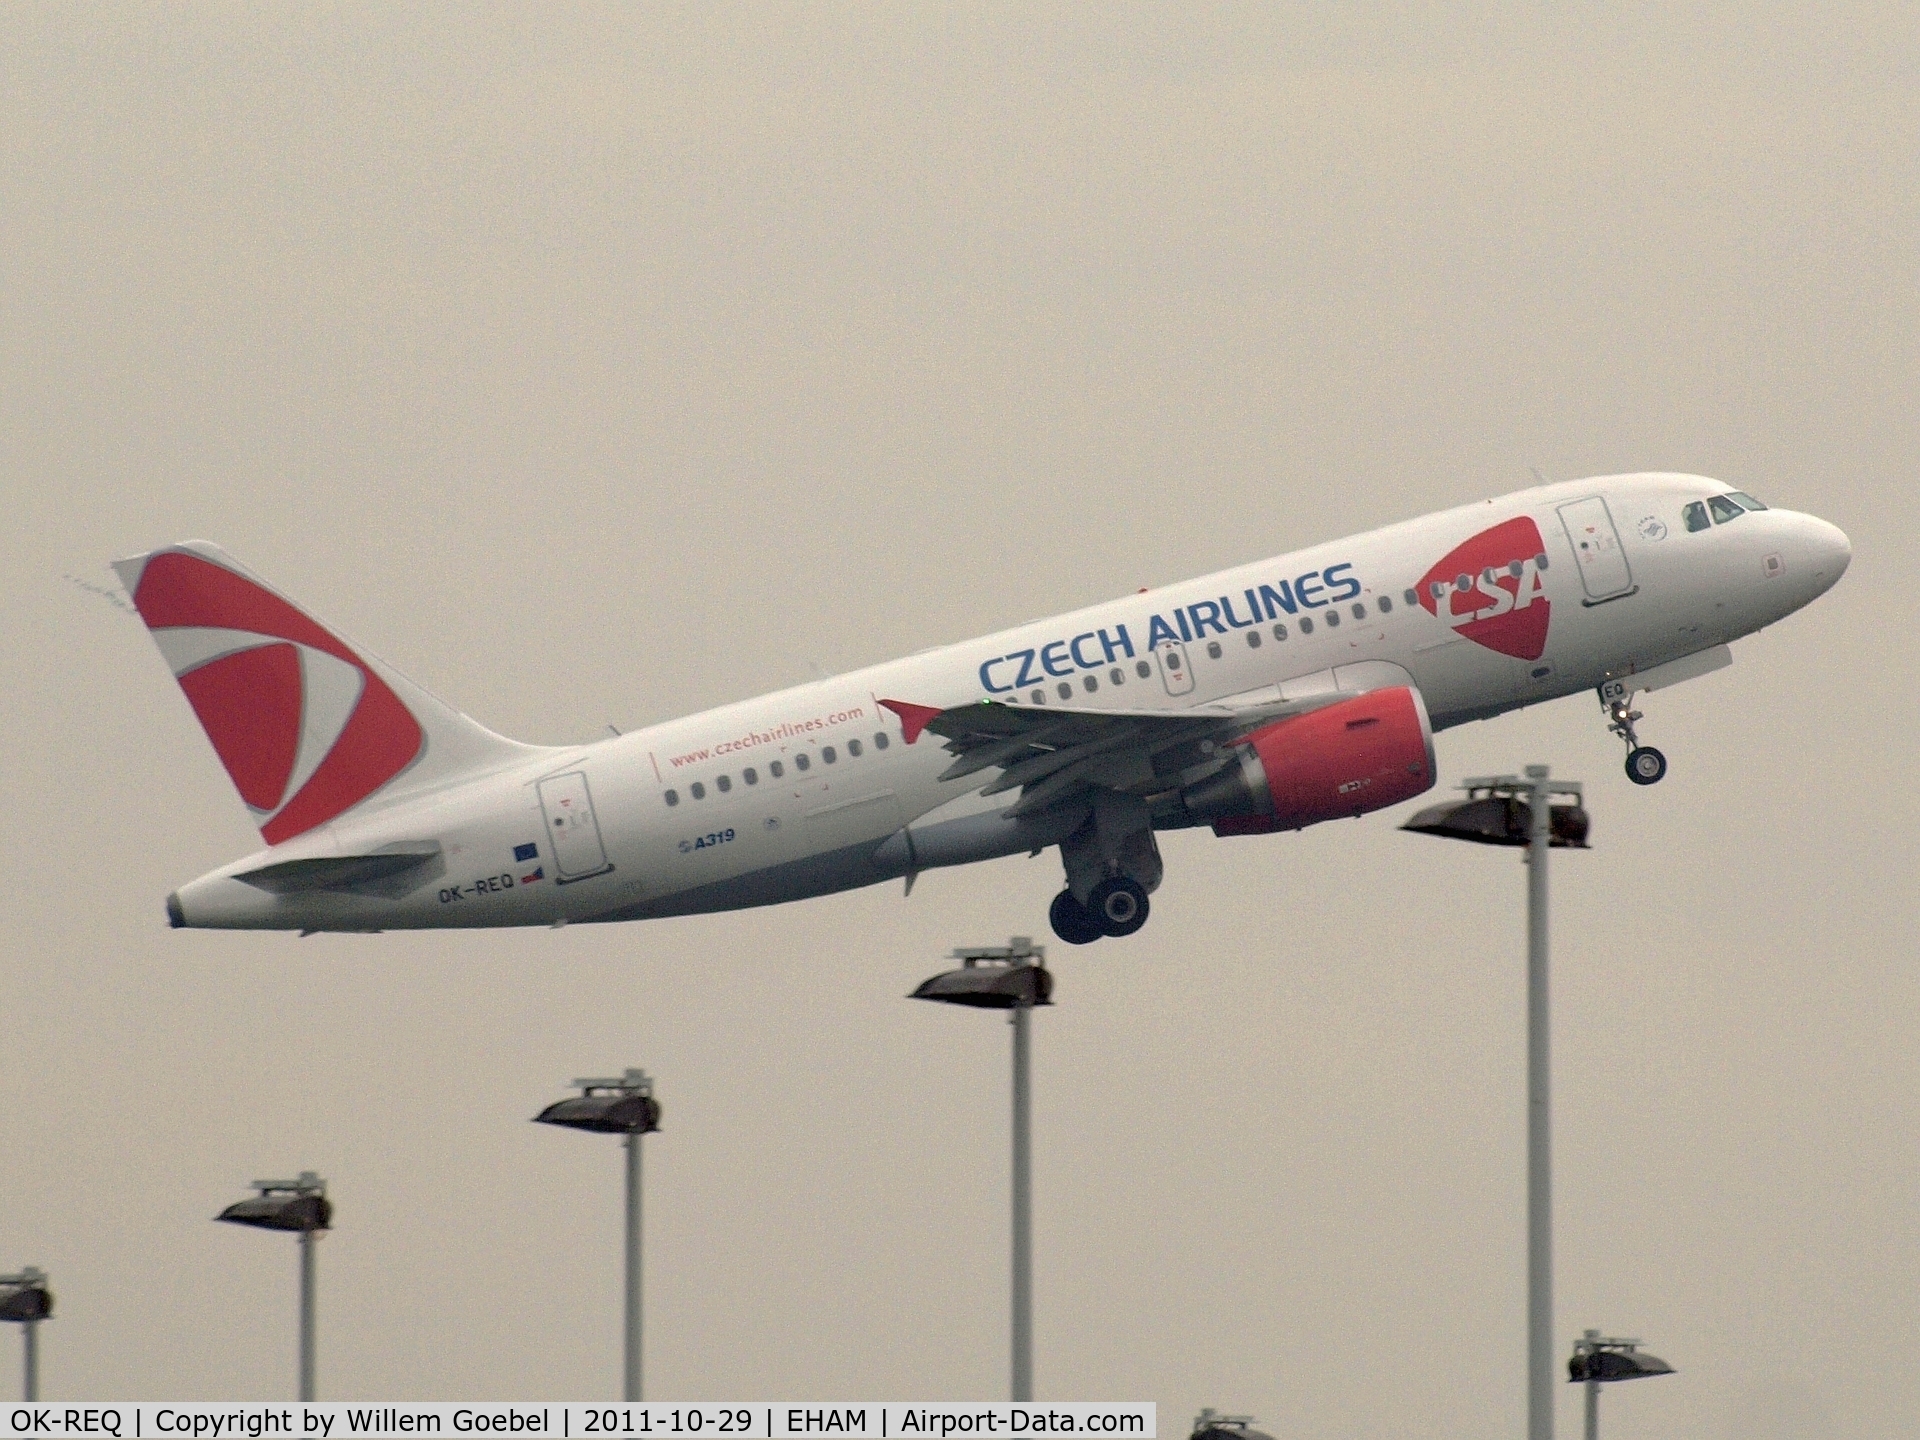 OK-REQ, 2011 Airbus A319-112 C/N 4713, Take off from the 18L runway of Schiphol Airport